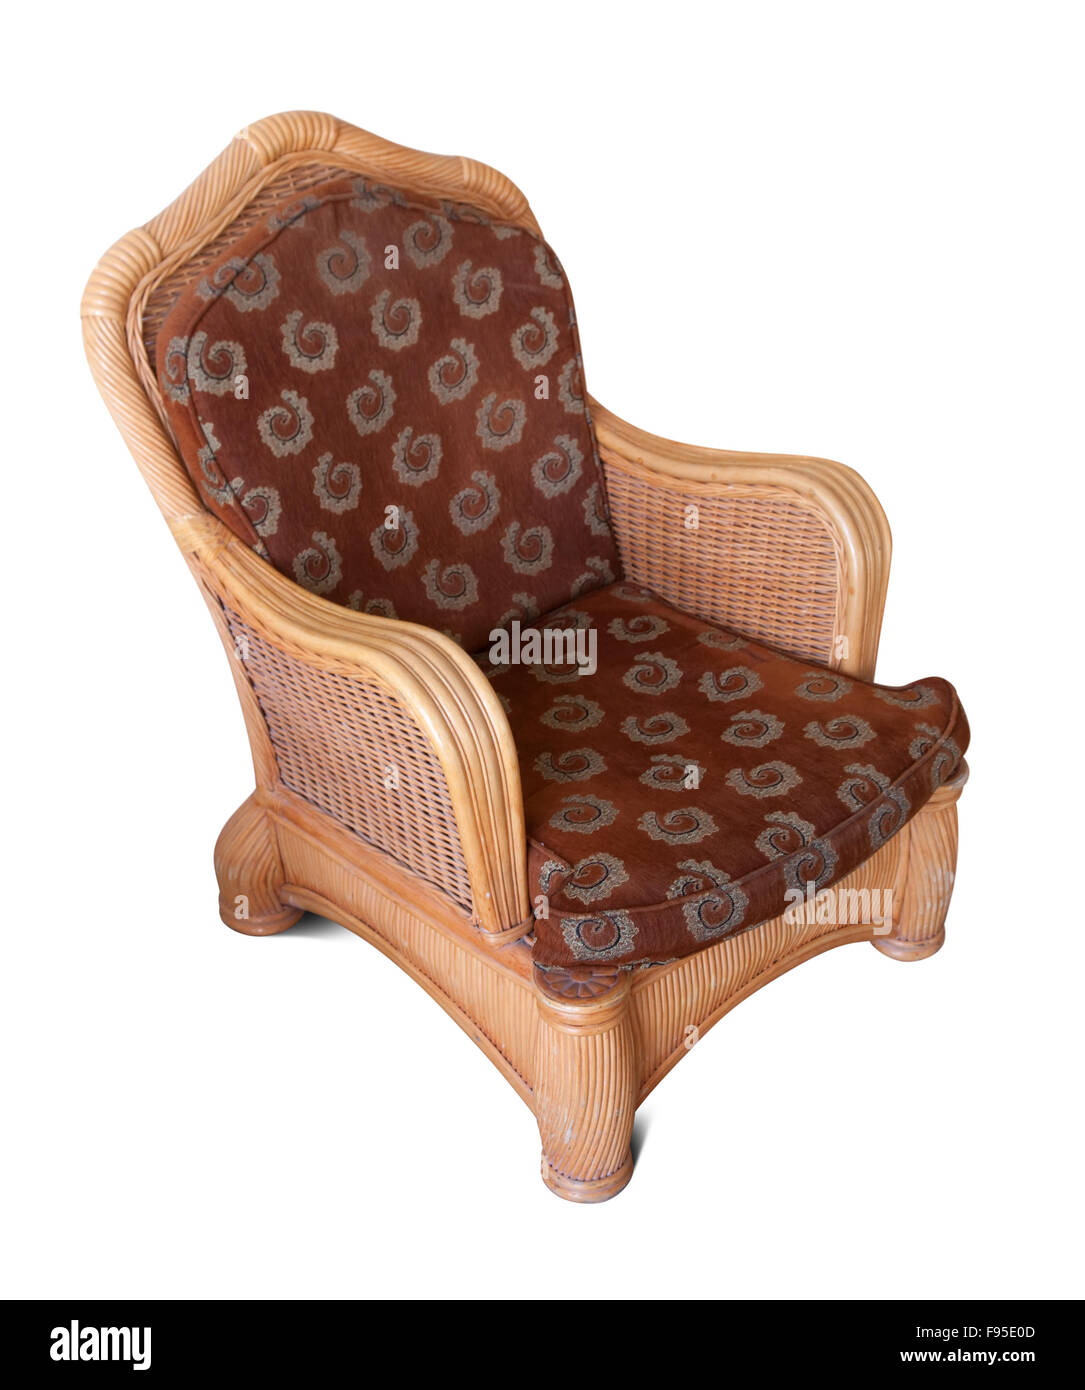 wattled armchair. Isolated over white background with shadows Stock Photo